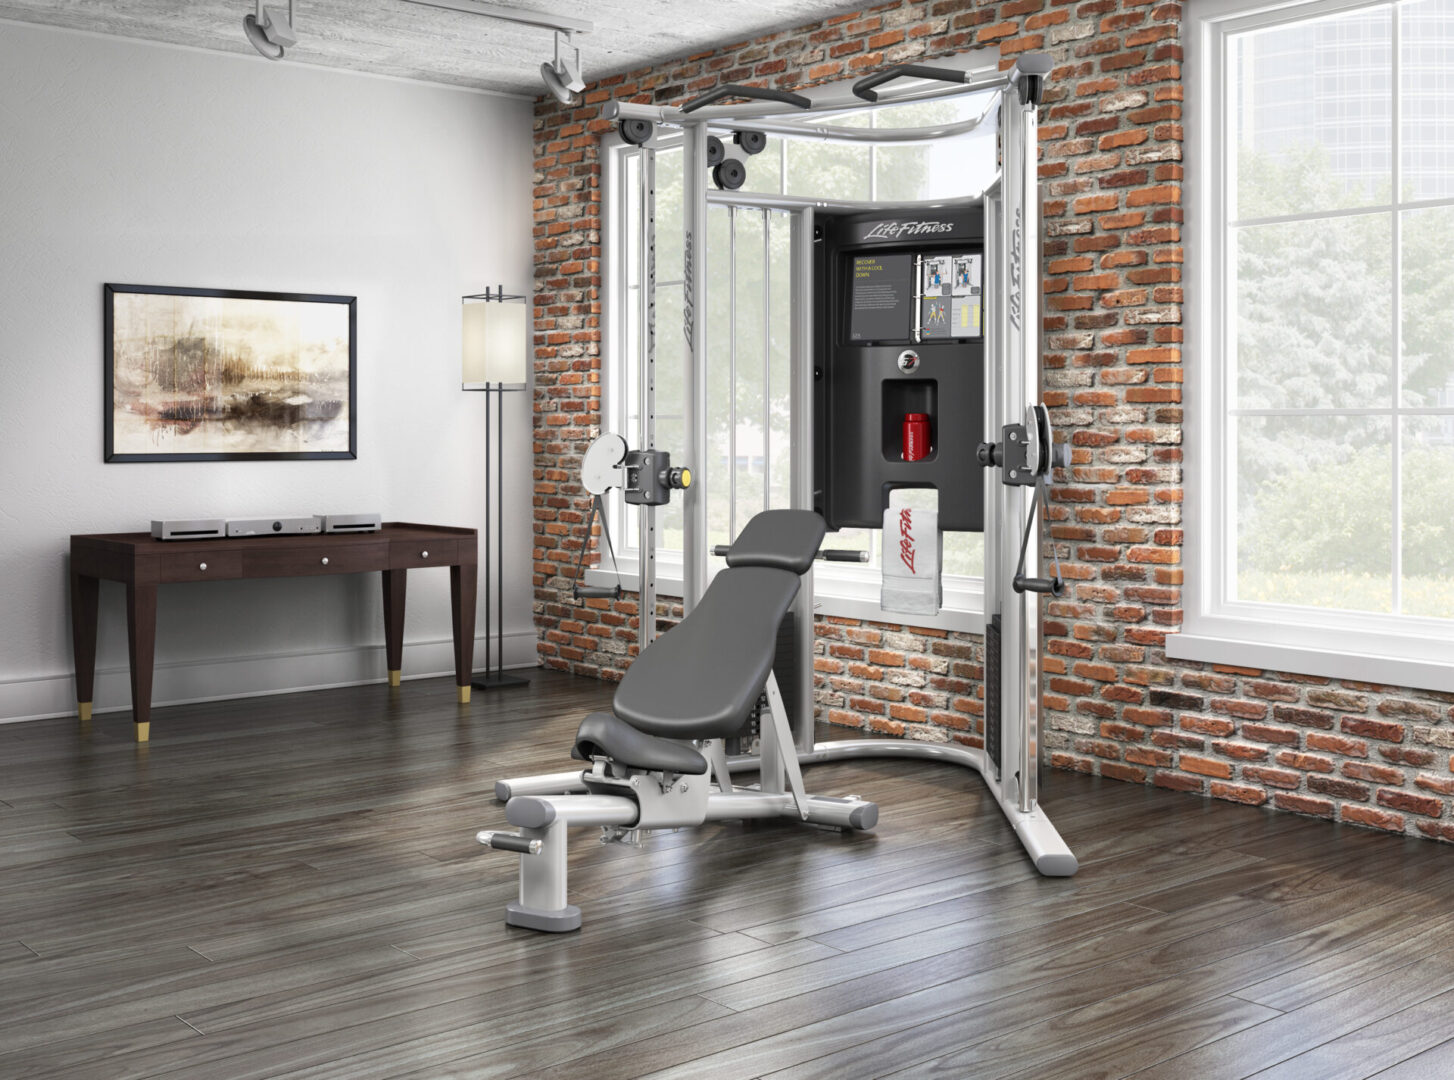 G7 Home Gym in living room brickwall